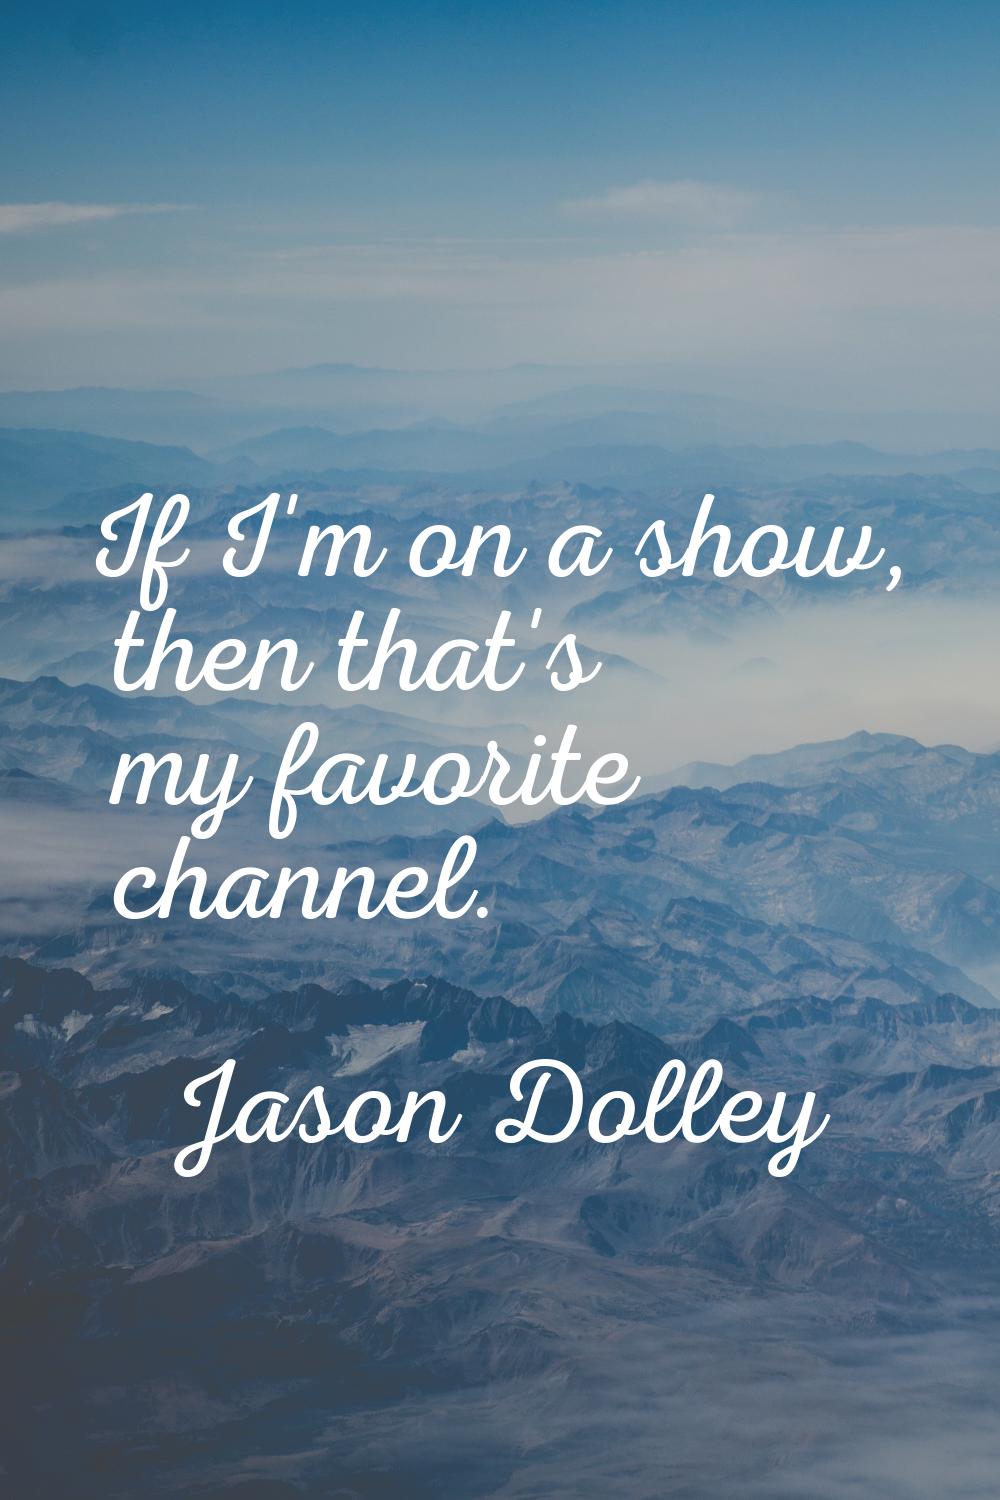 If I'm on a show, then that's my favorite channel.